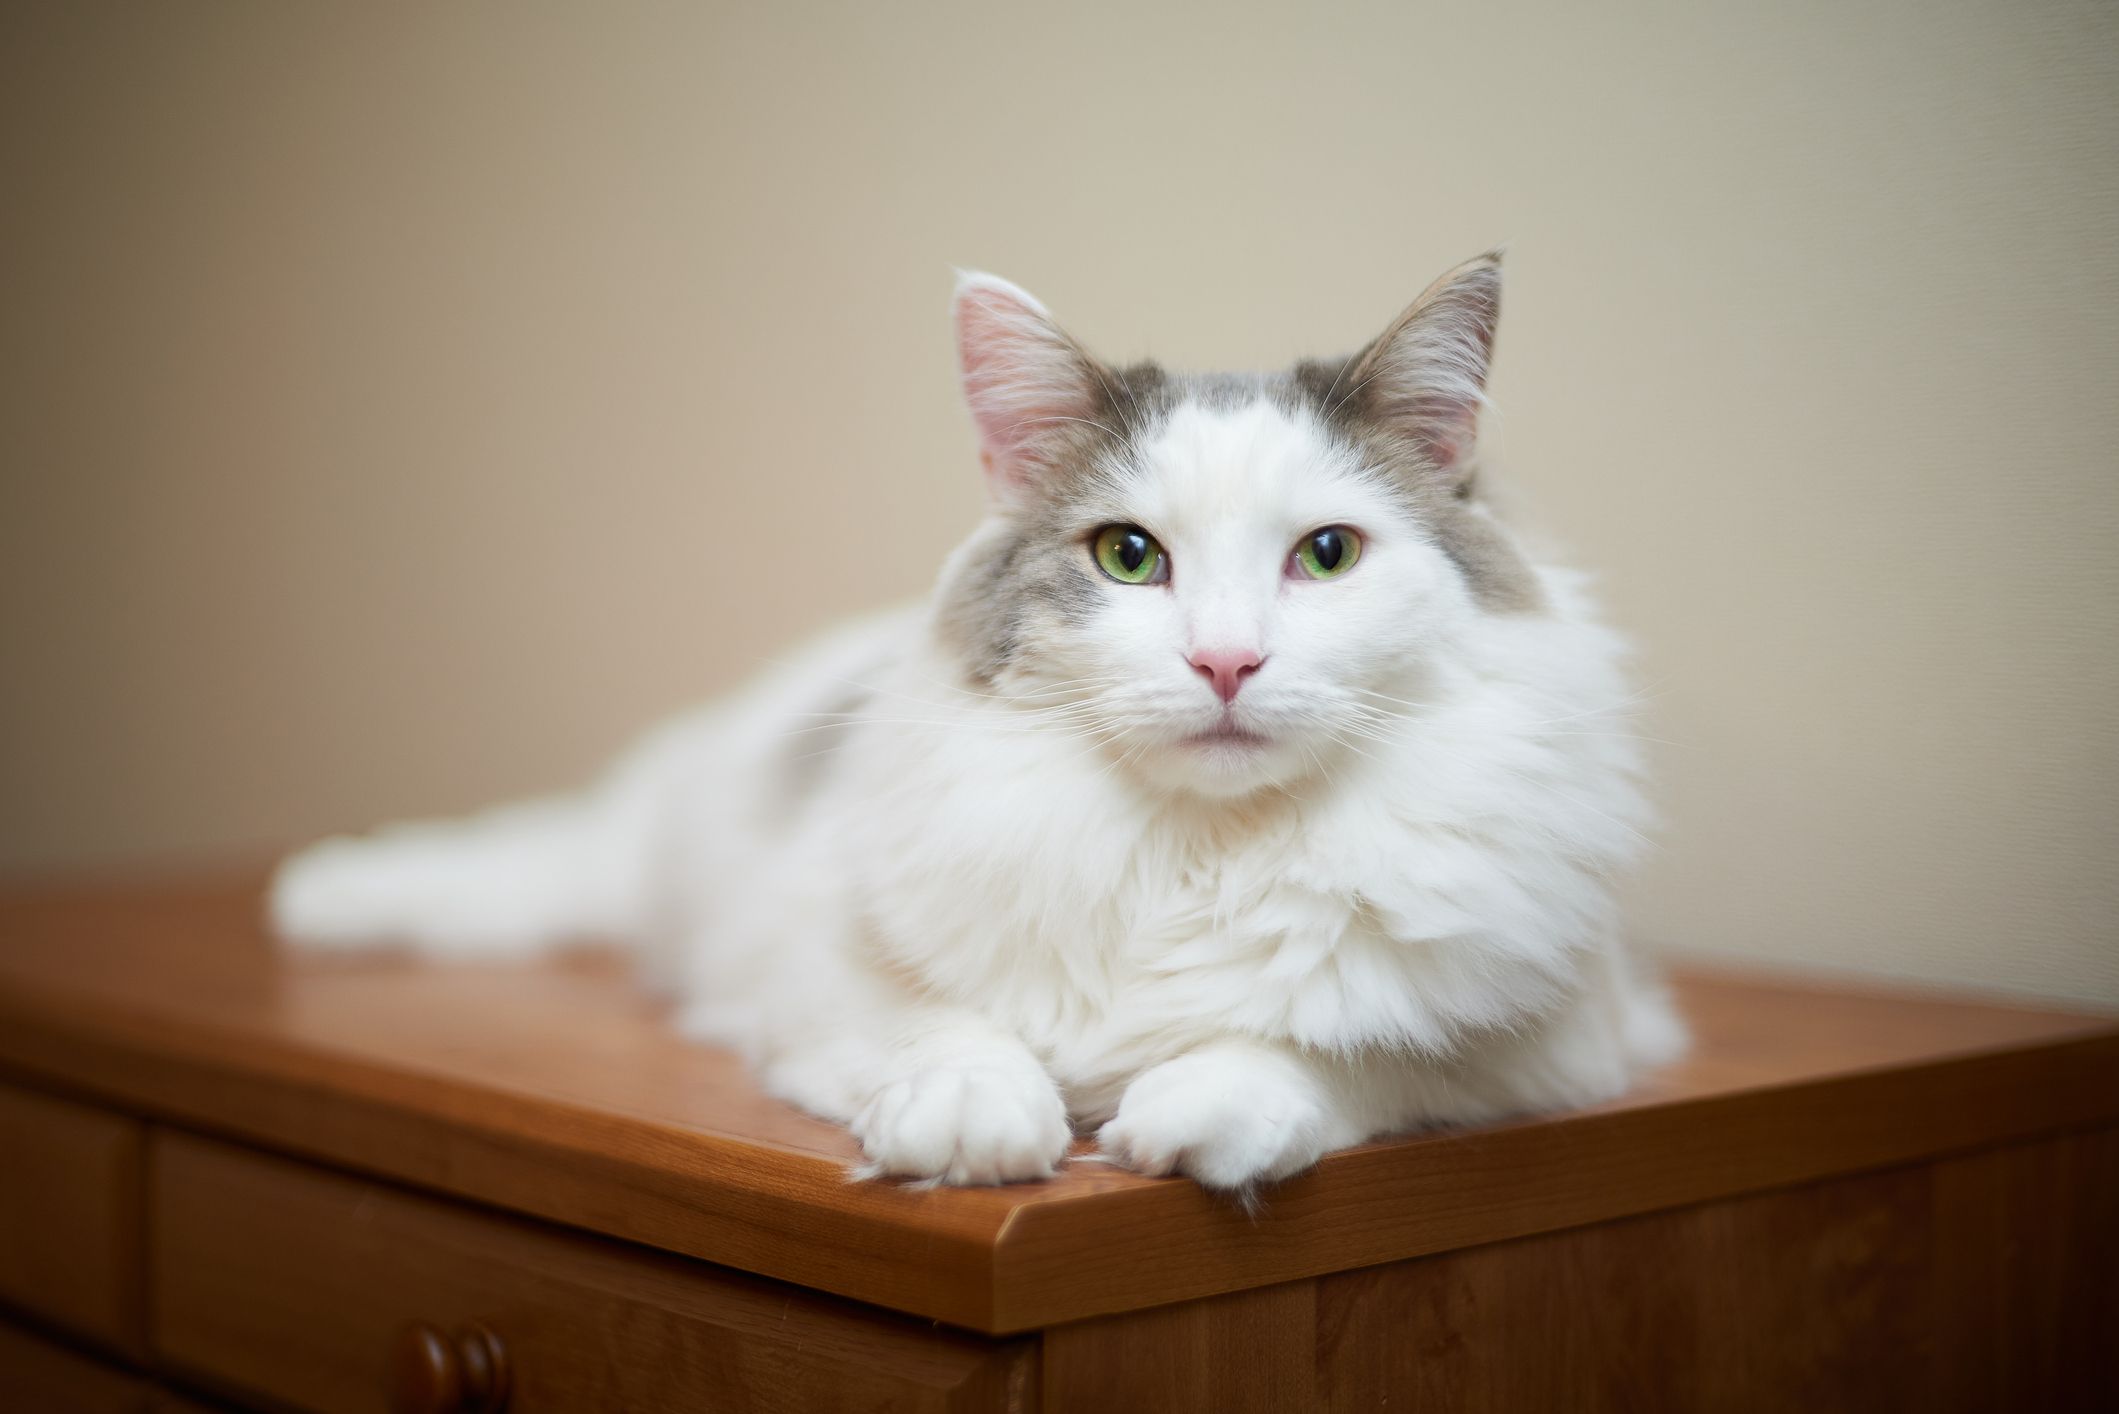 A white cat with long hair and green eyes sitting on a wood dresser and looking at the camera.